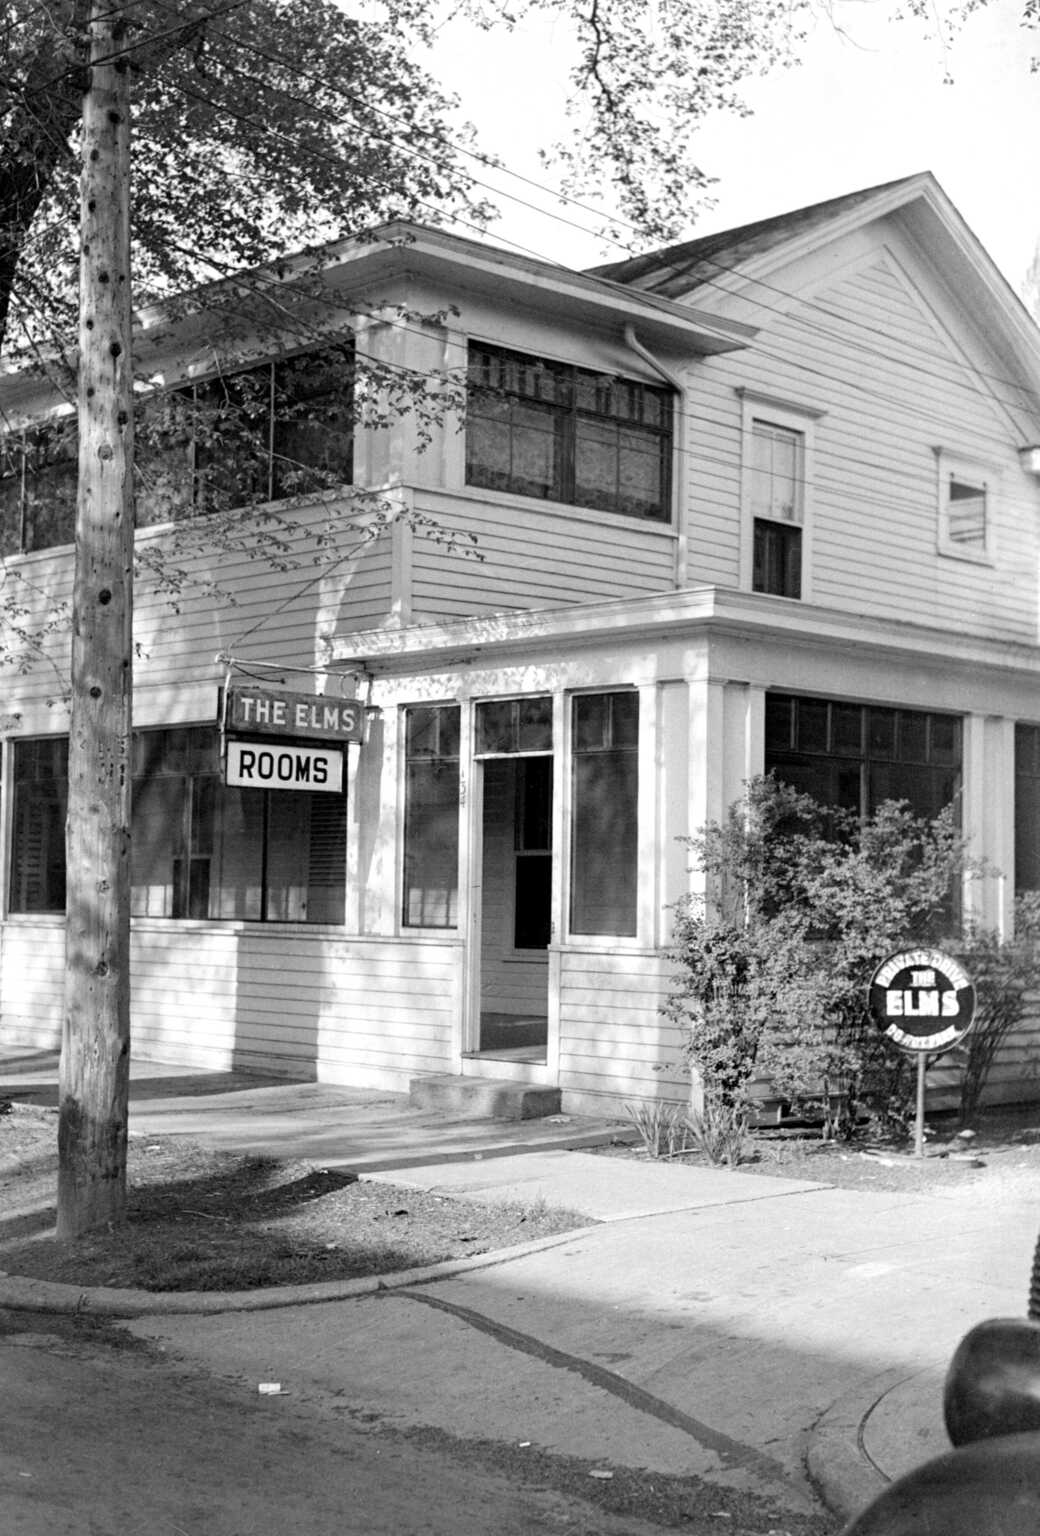 Black and white photo of The Elms Hotel in Saugatuck/Douglas